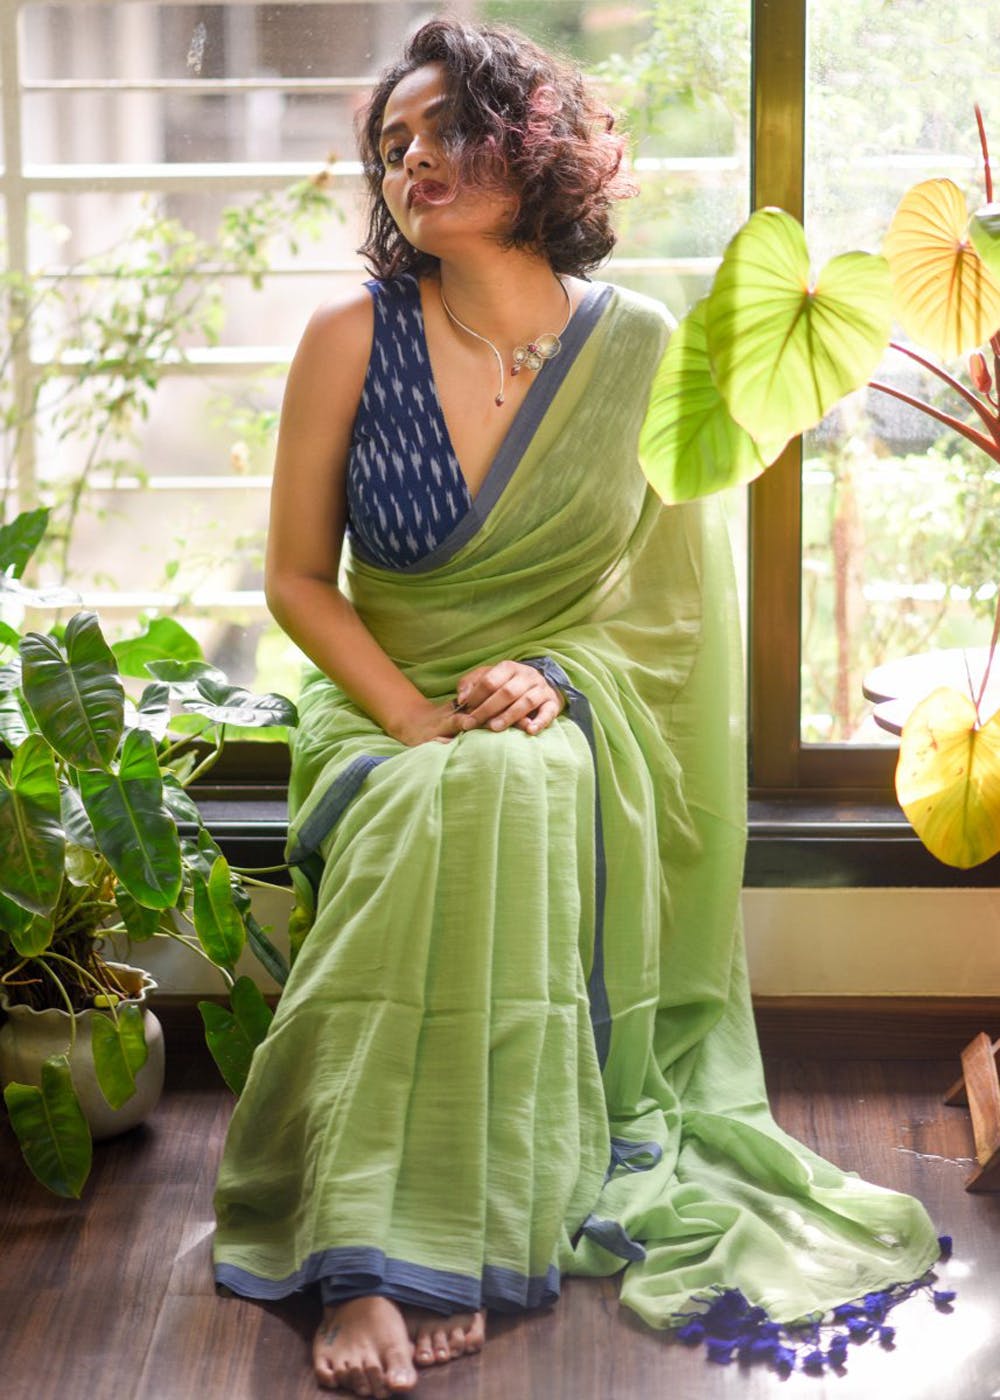 Get Light Green Mul Cotton Saree With Blue Border at ₹ 2050 | LBB Shop